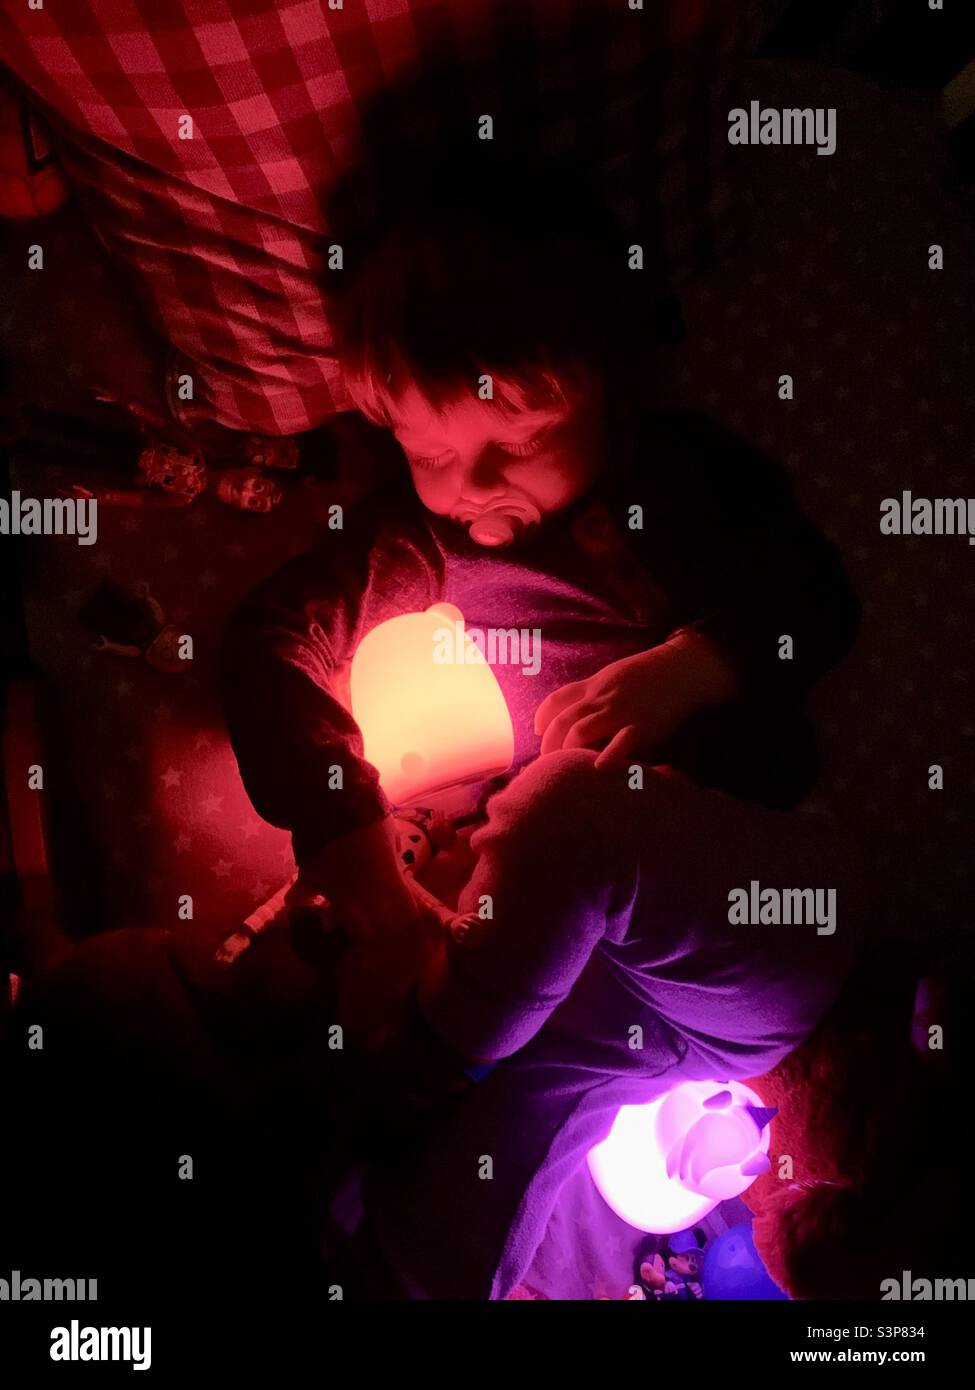 Sleeping toddler with glowing colorful nightlights. Stock Photo